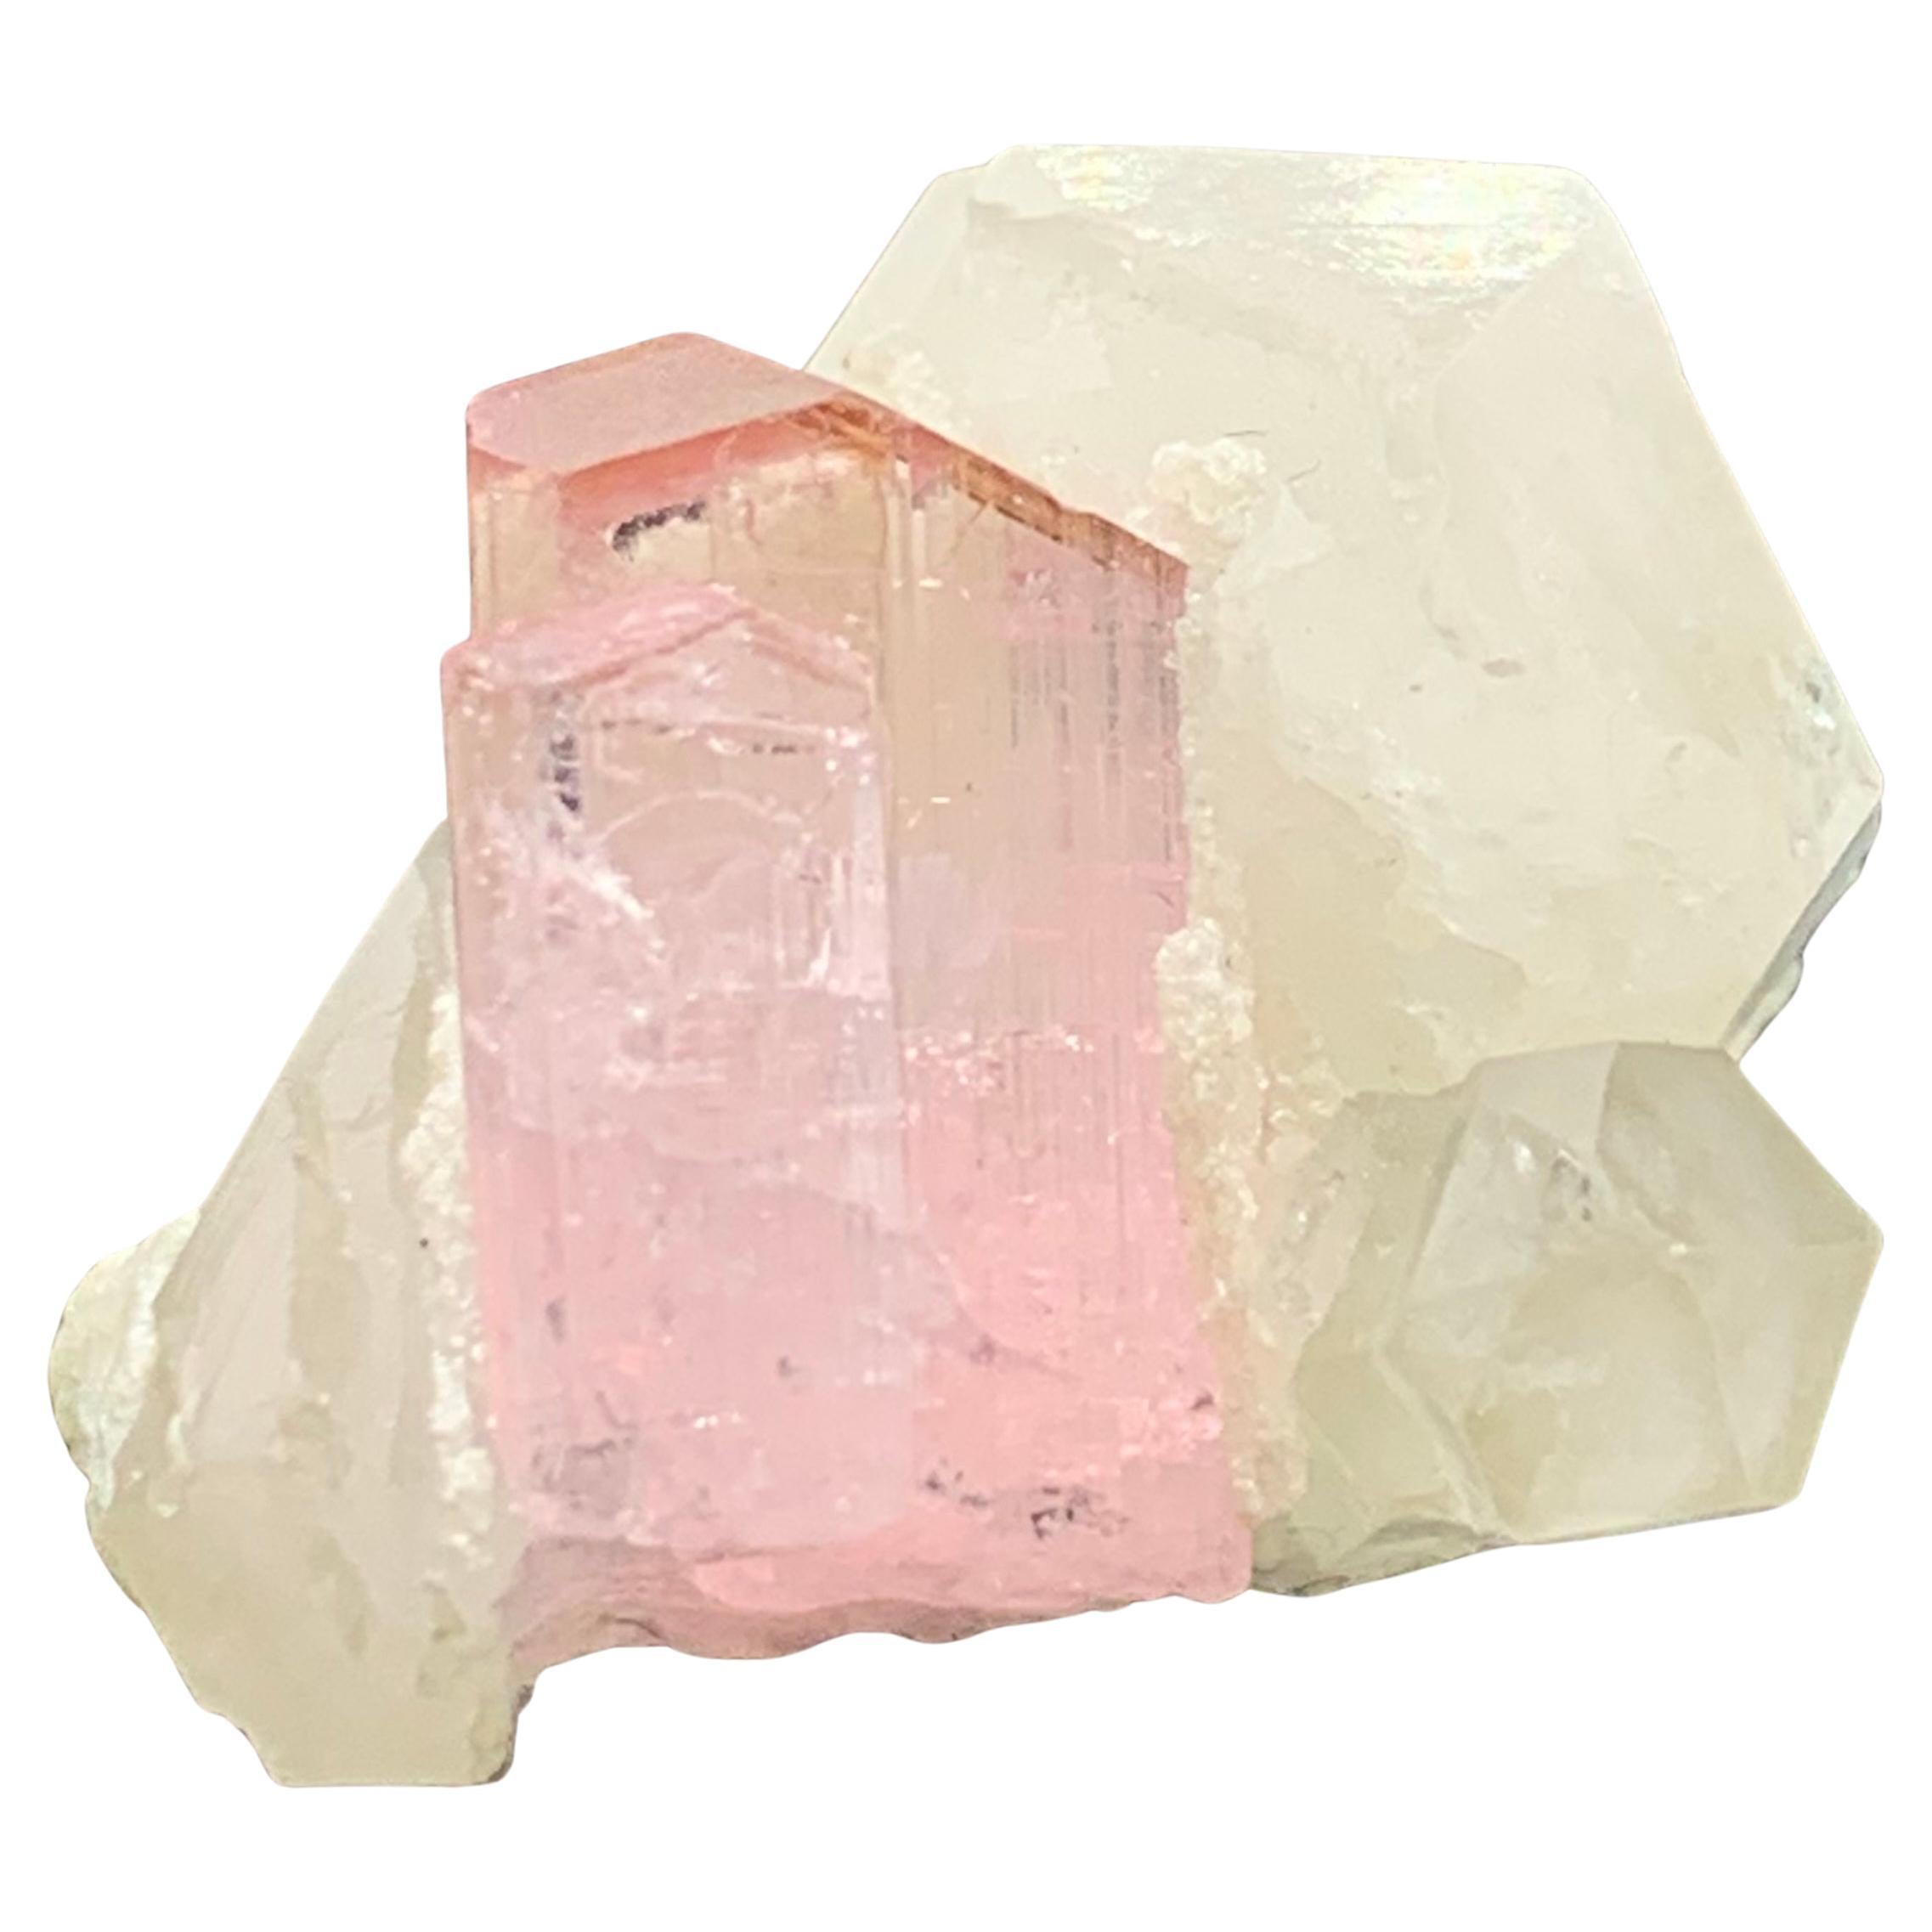 35 Carat Cute Pink Tourmaline Specimen With Quartz From Kunar, Afghanistan  For Sale